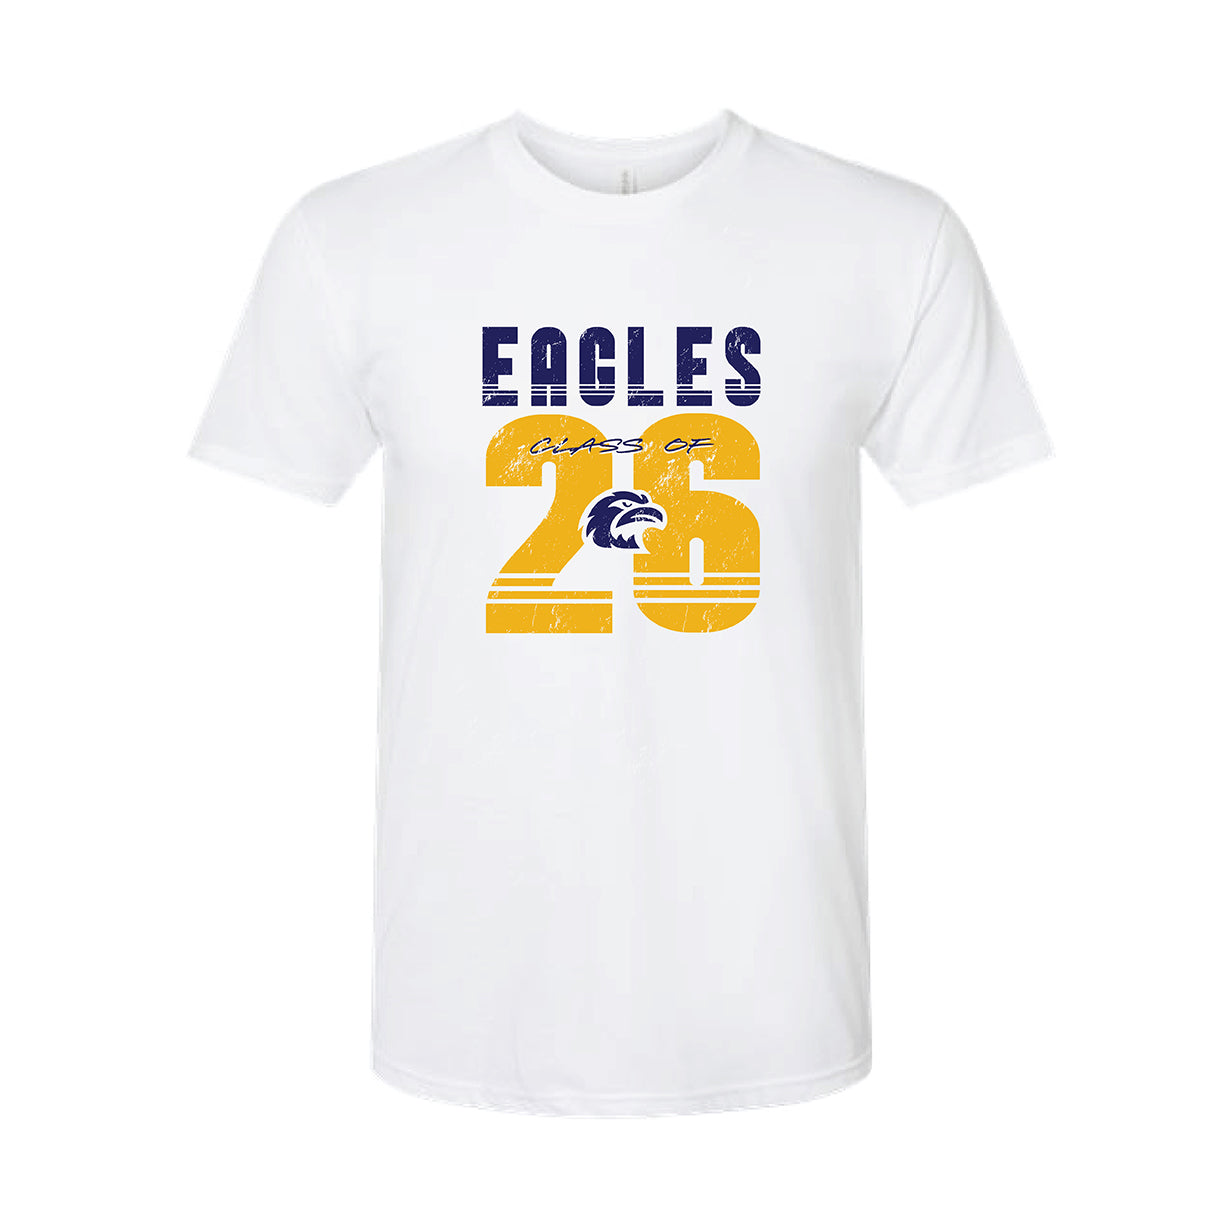 SVMS Class of 2026 8th Grade Tee in White